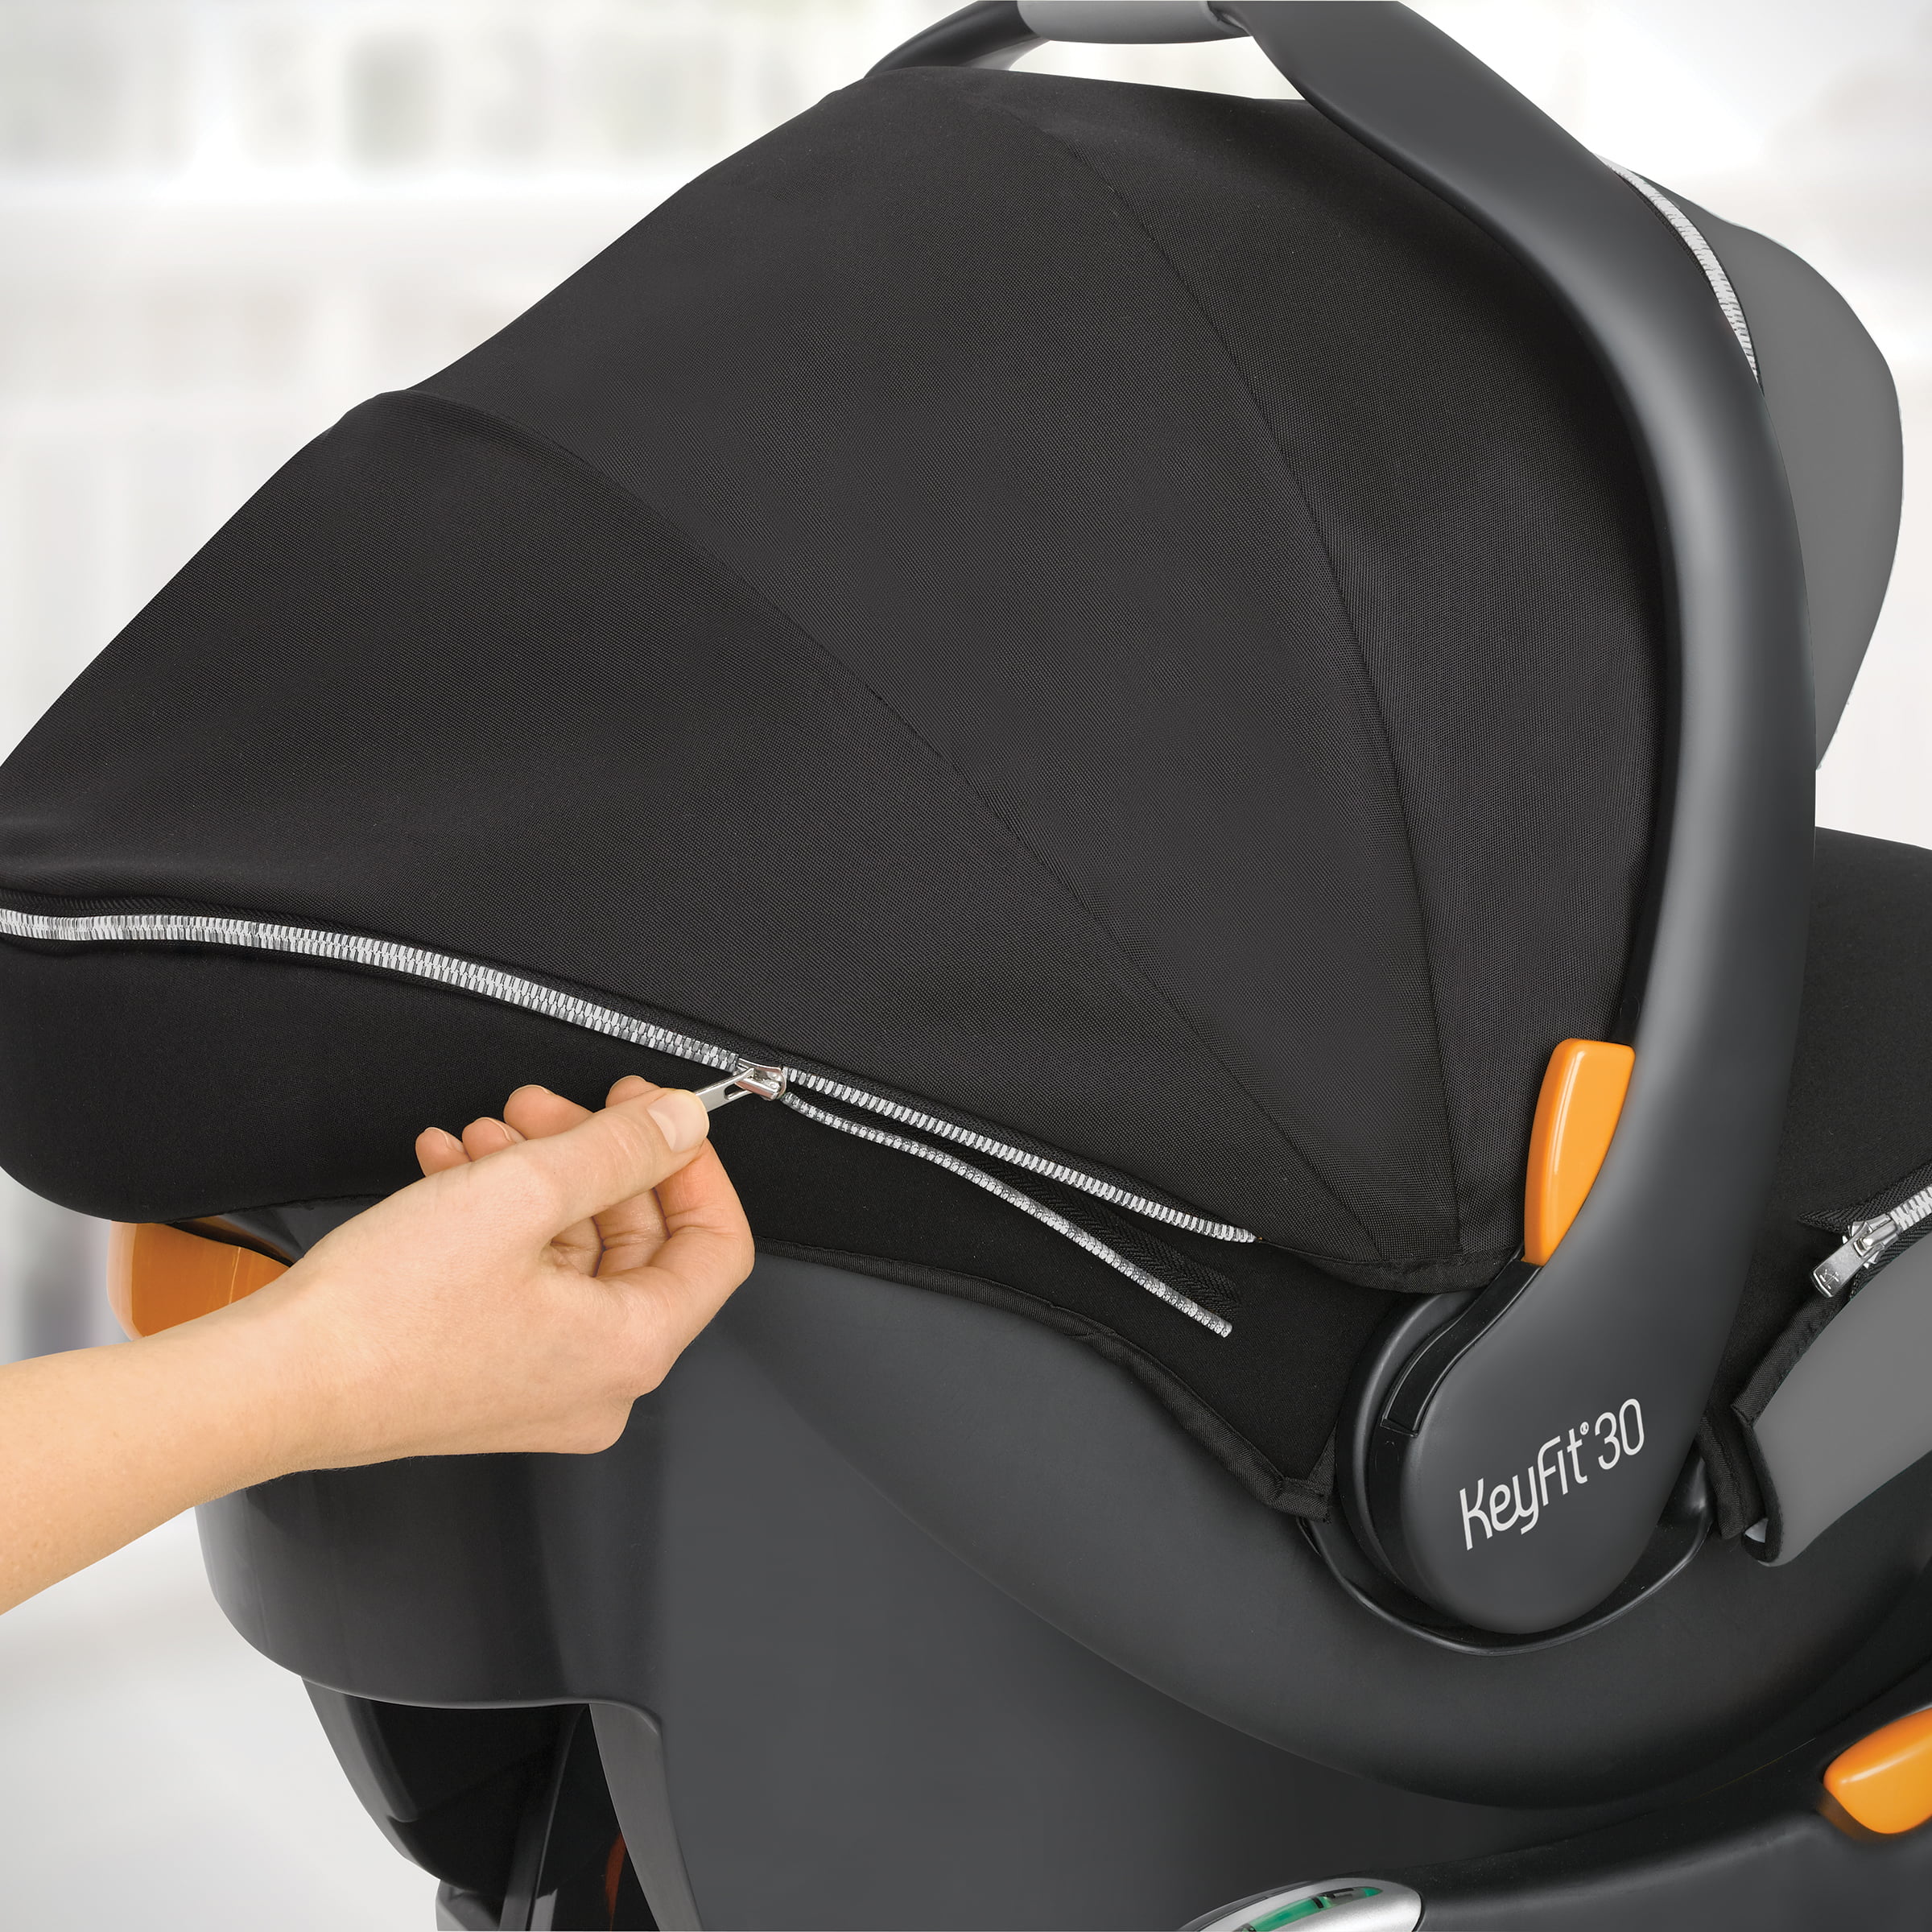 chicco keyfit 30 zip air travel system